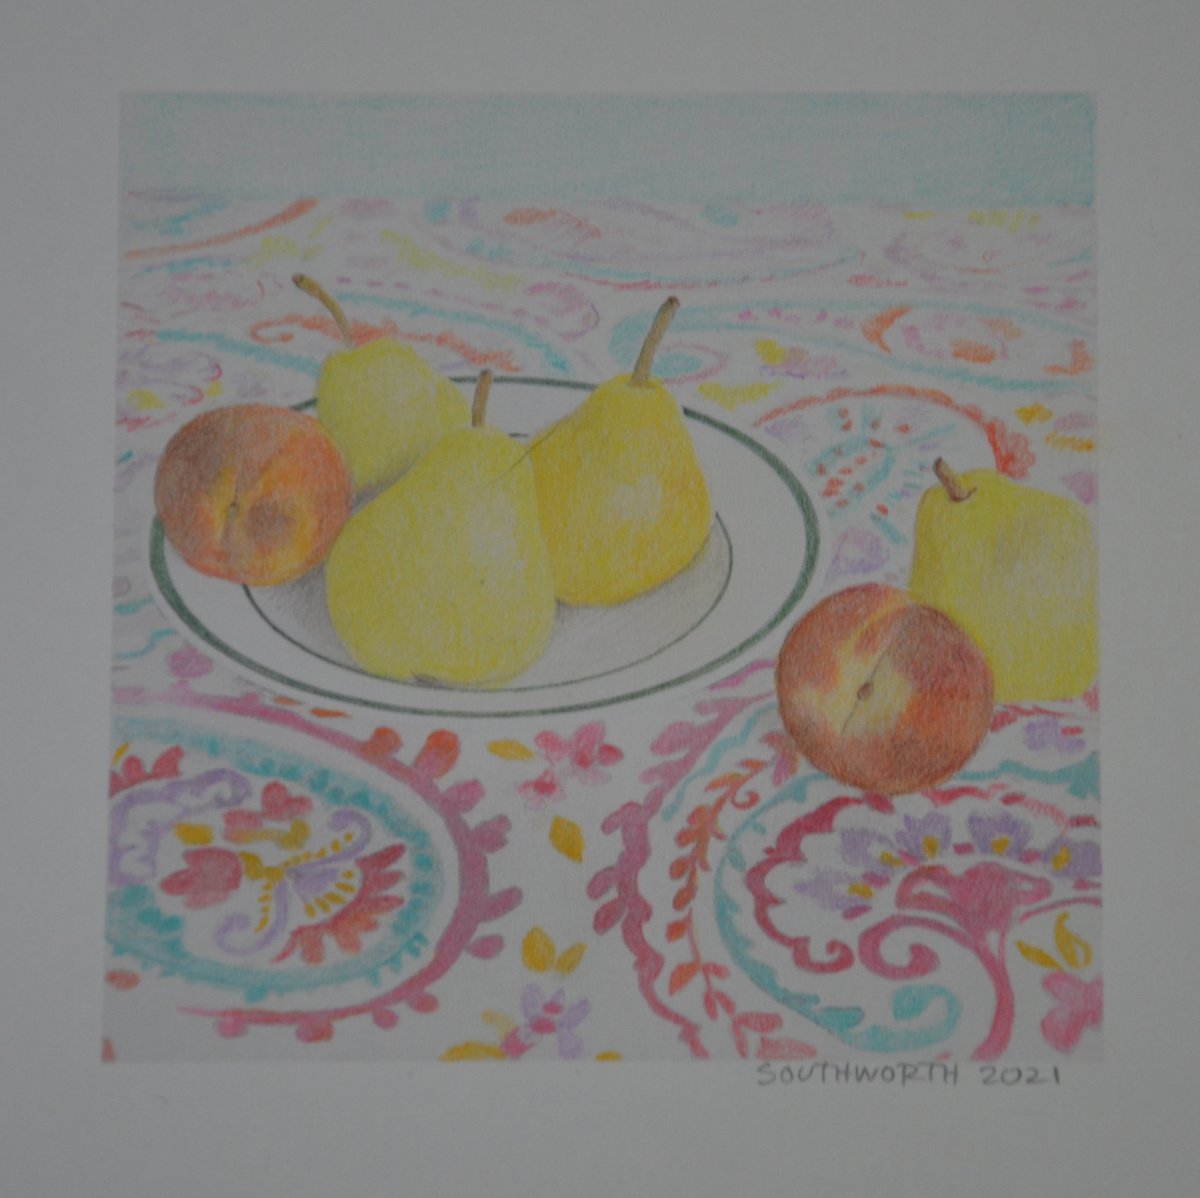 Miniature Still Life Pears, Peaches & Paisley by Linda Southworth